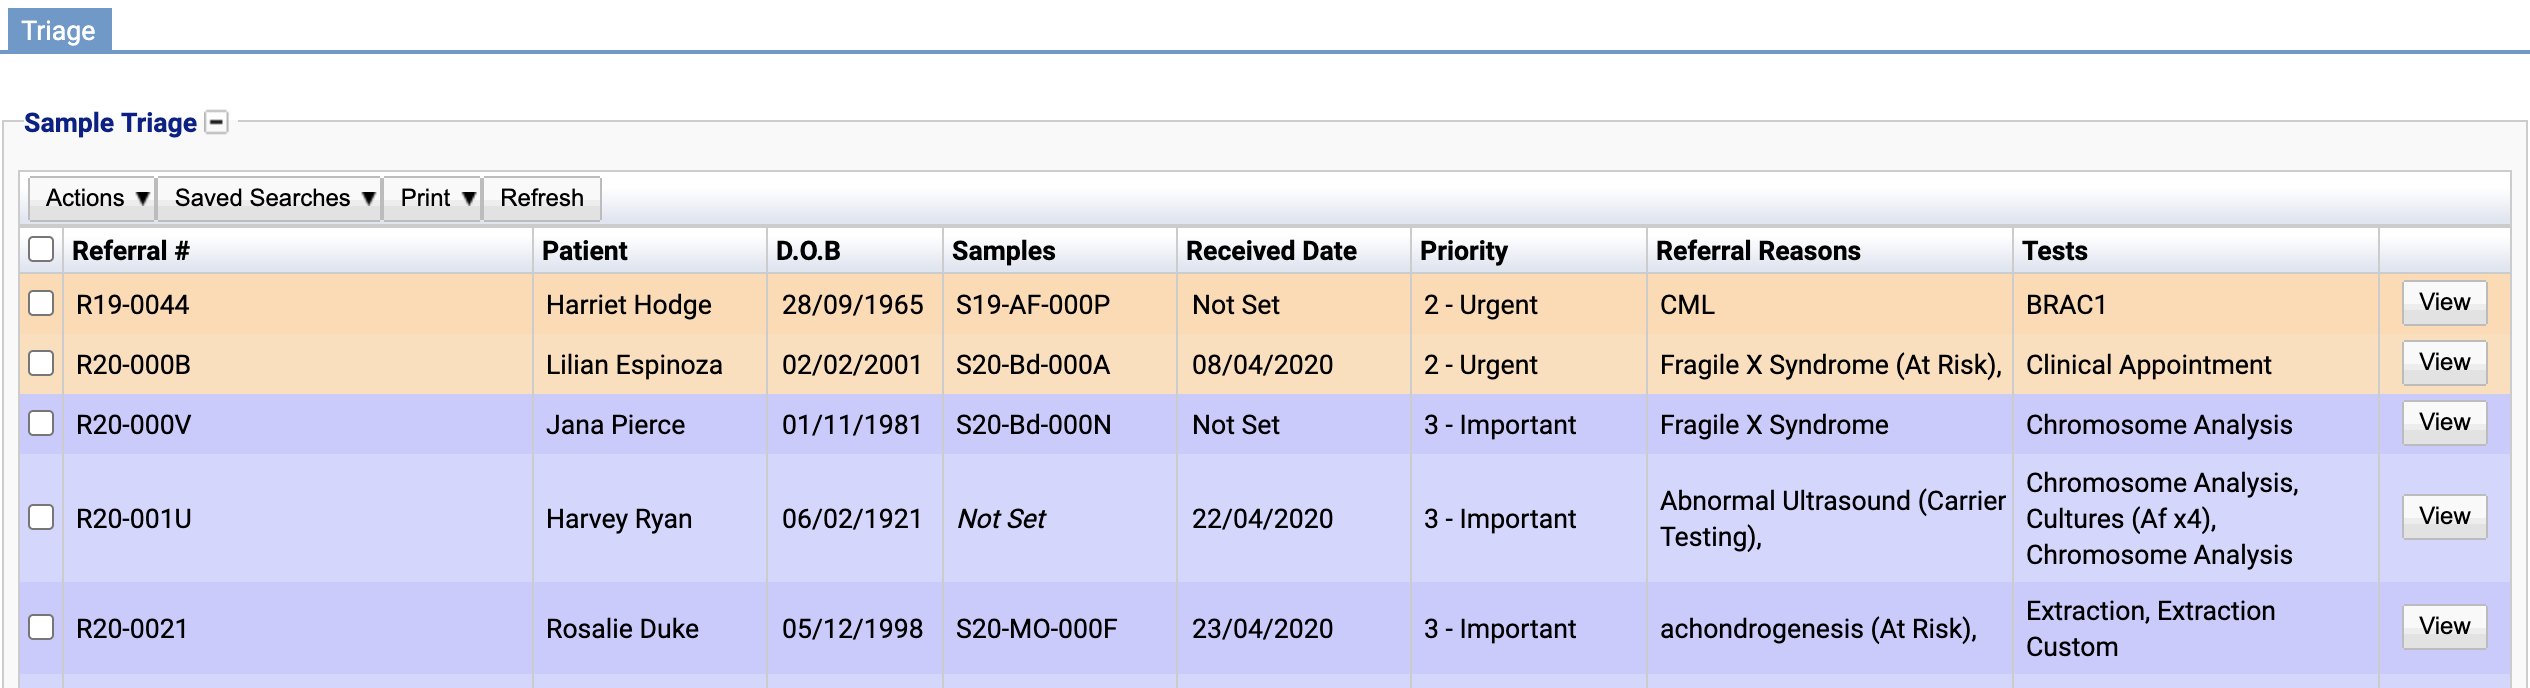 View of the sample triage page.